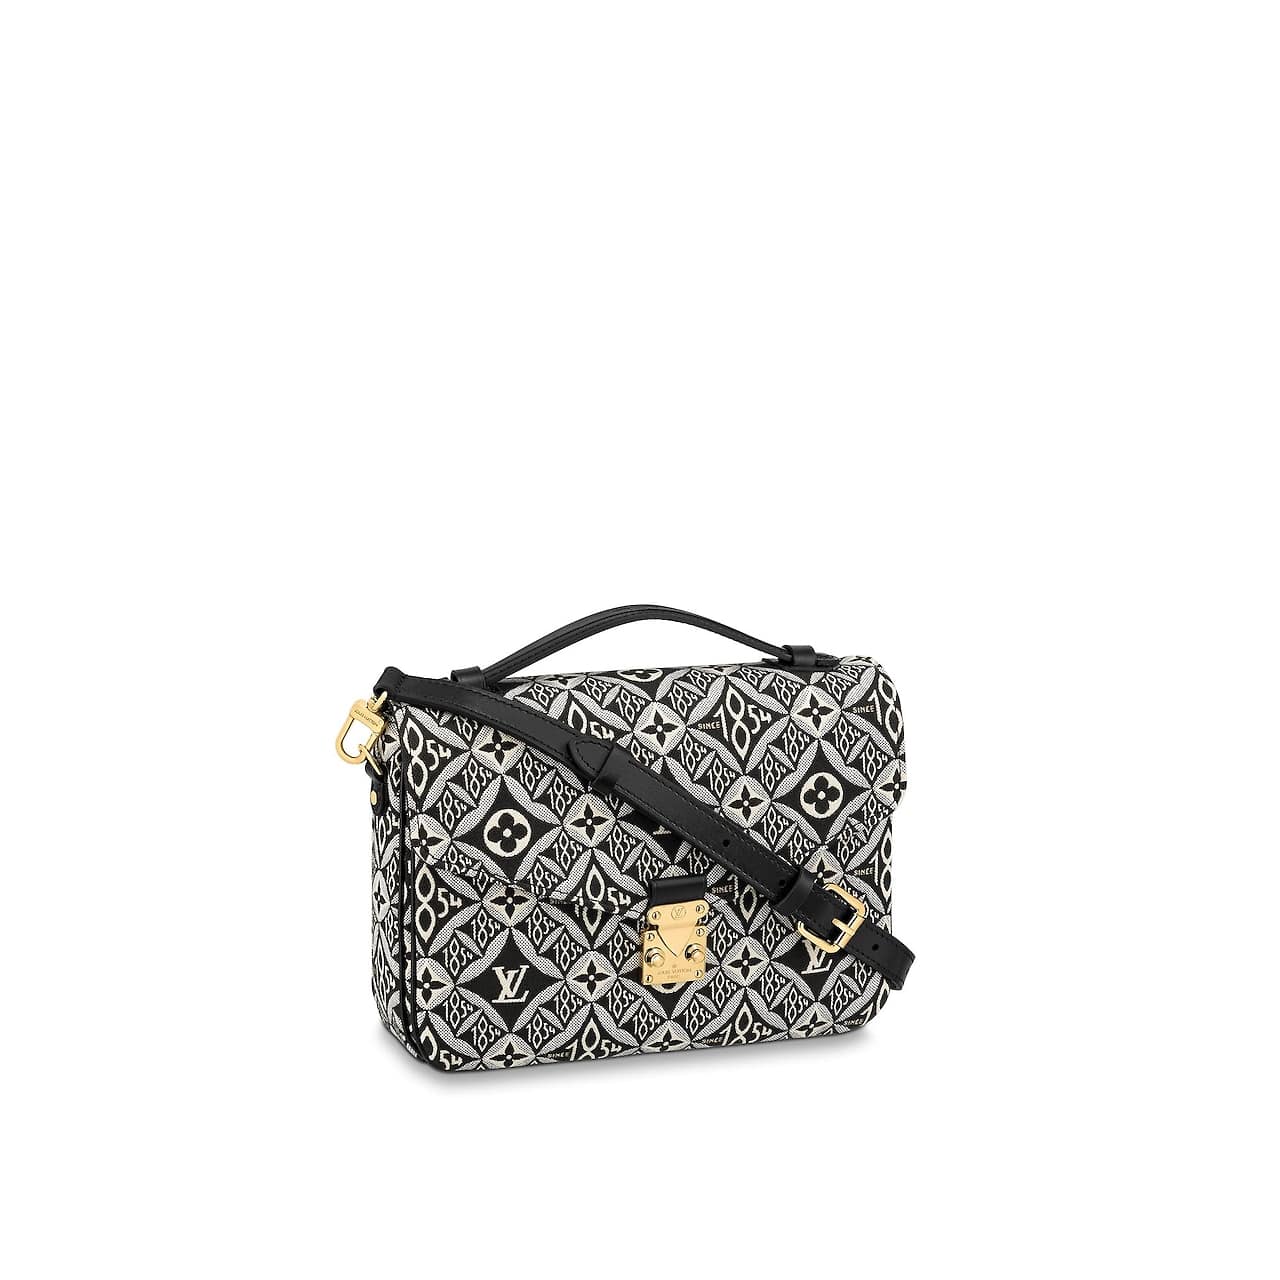 Louis Vuitton Fall/Winter 2020 Bag Collection Featuring Since 1854 Textile | Spotted Fashion